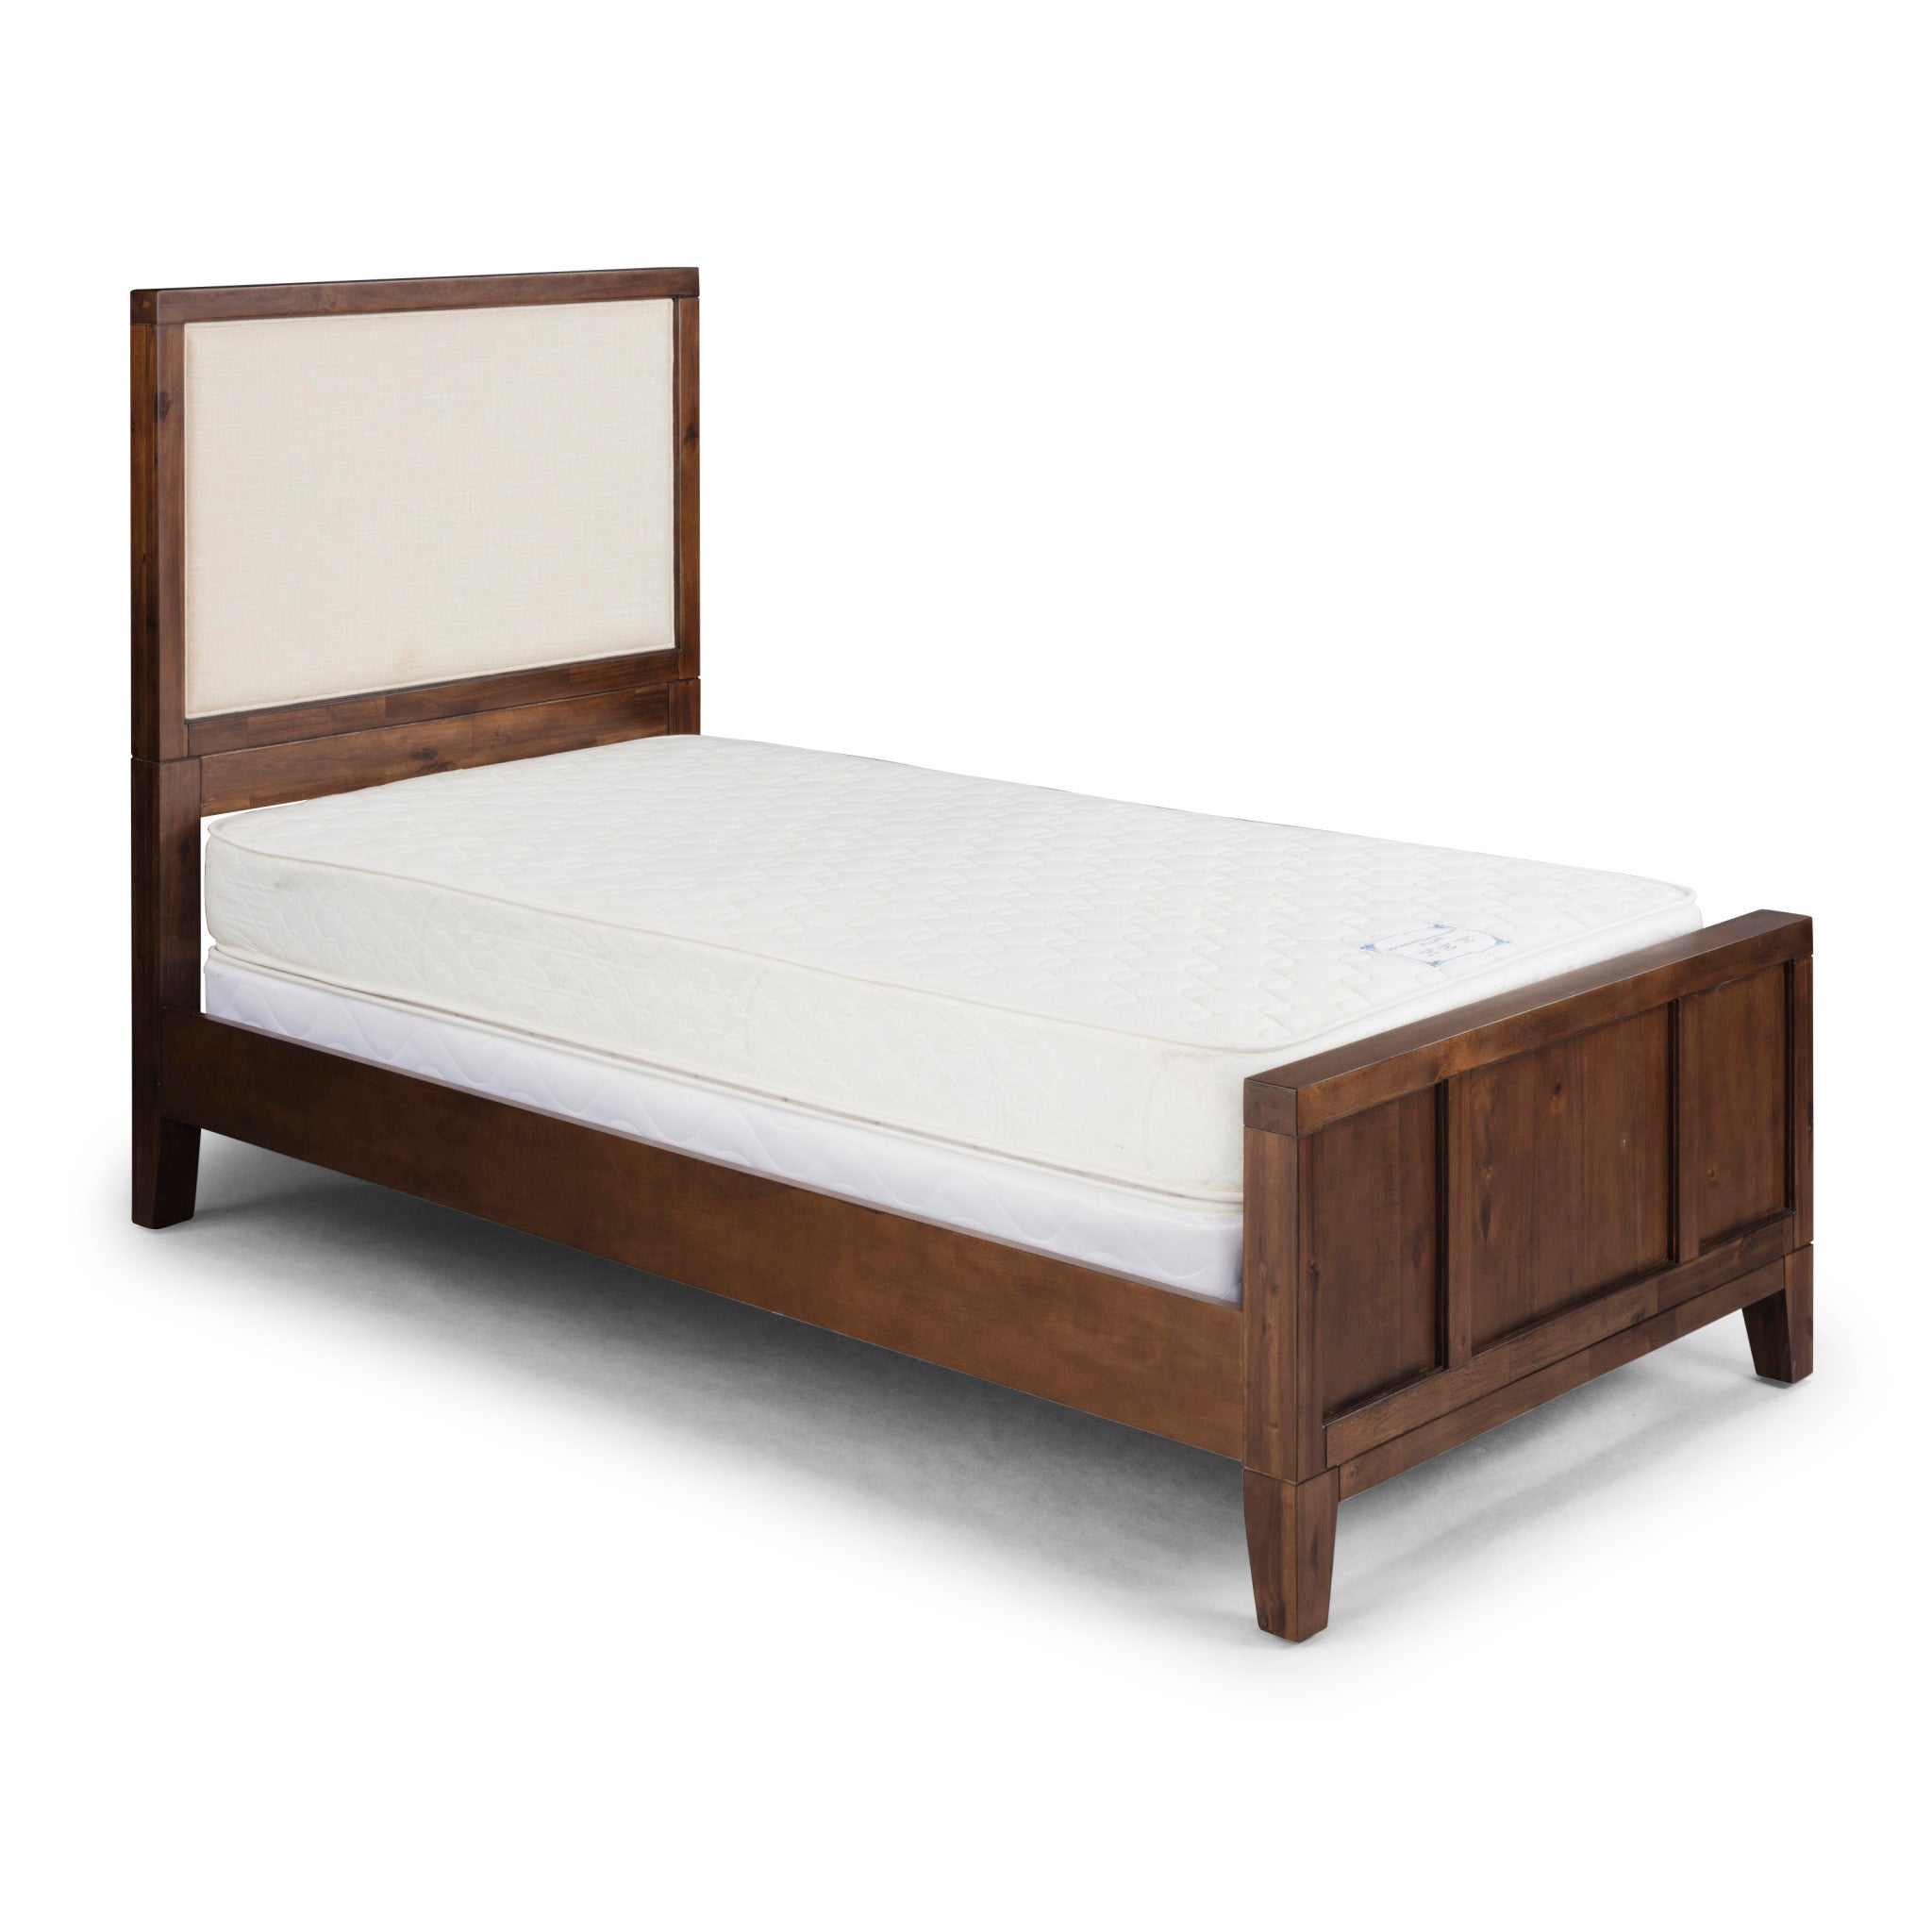 Bungalow Brown Twin Bed - image 1 of 9